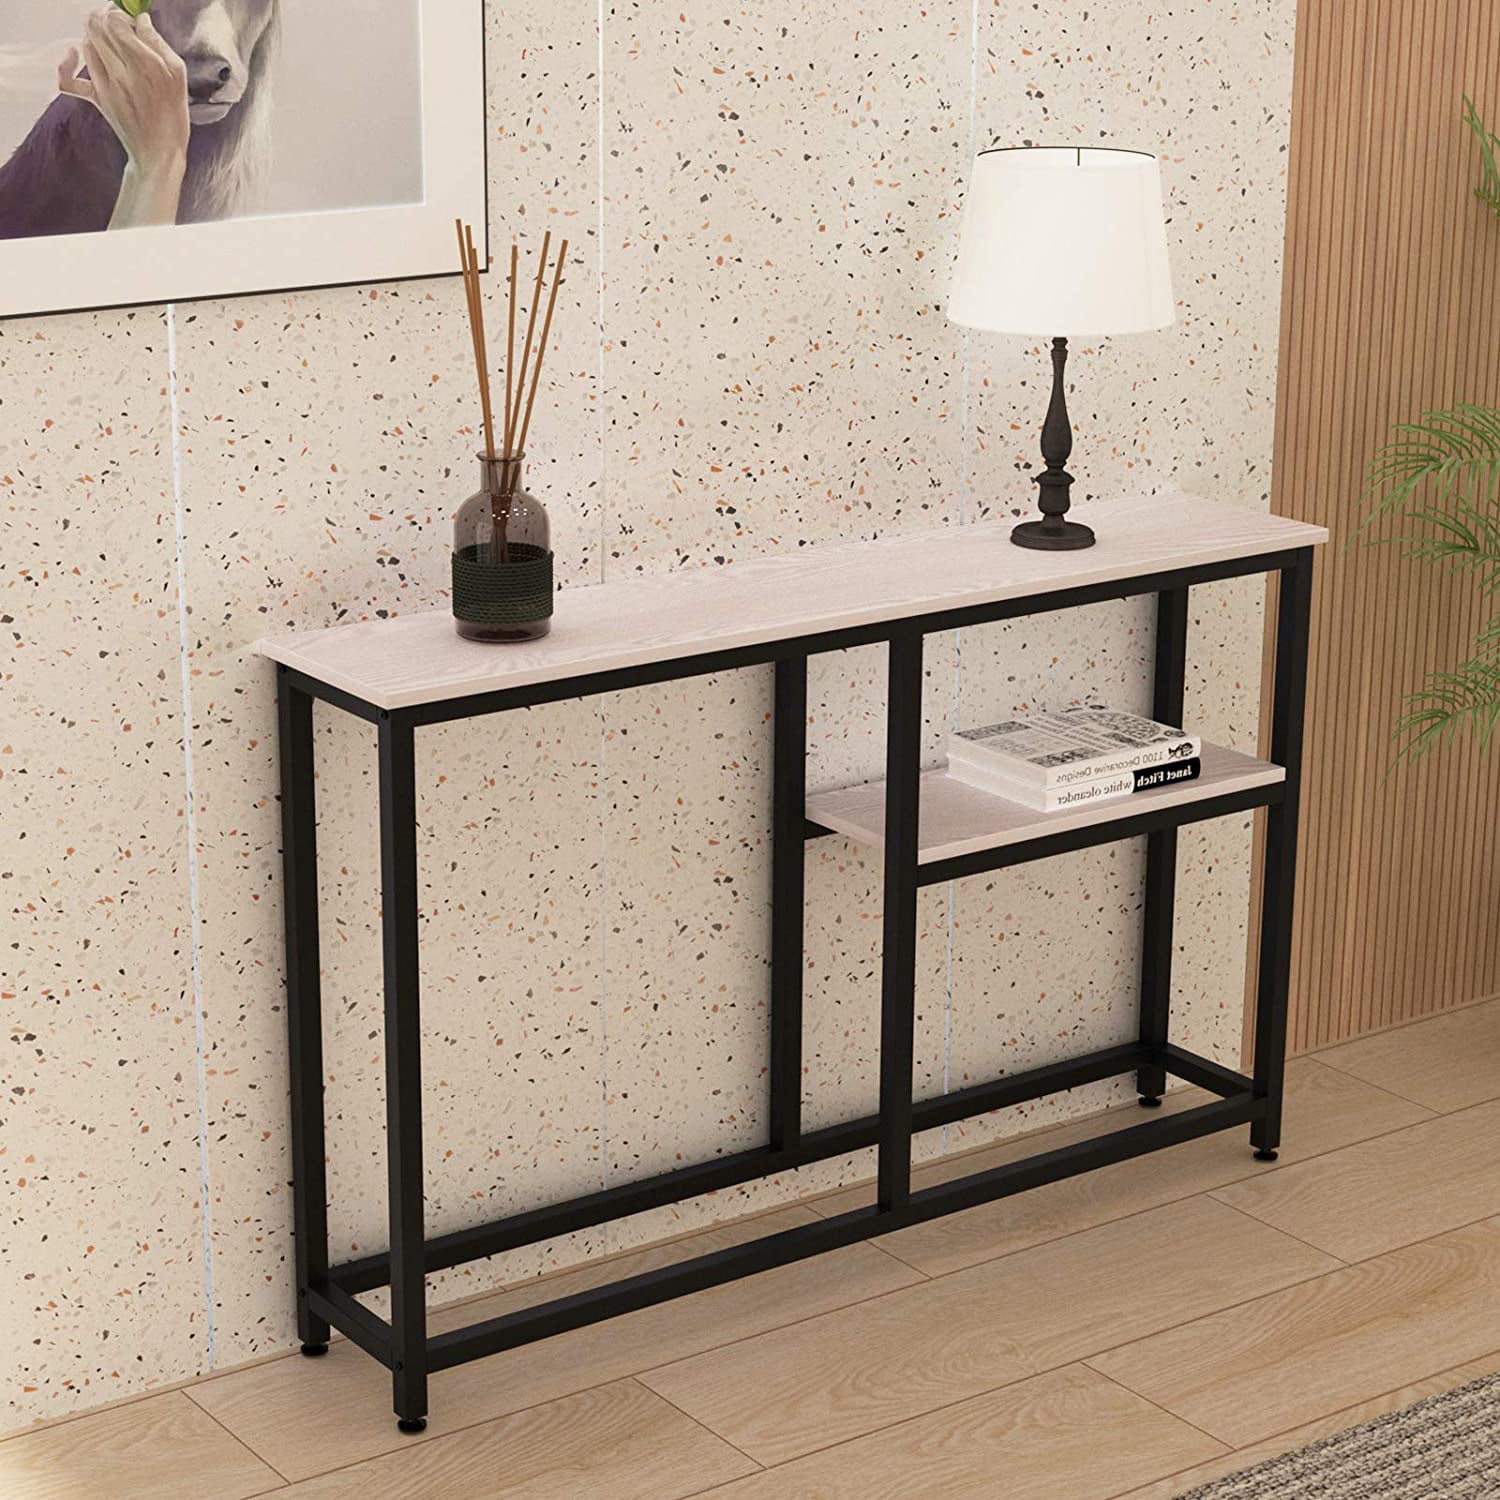 soges Console Table Hallway Entryway Table with Shelf Living Room Bedroom Desk Storage Shelves DX-122